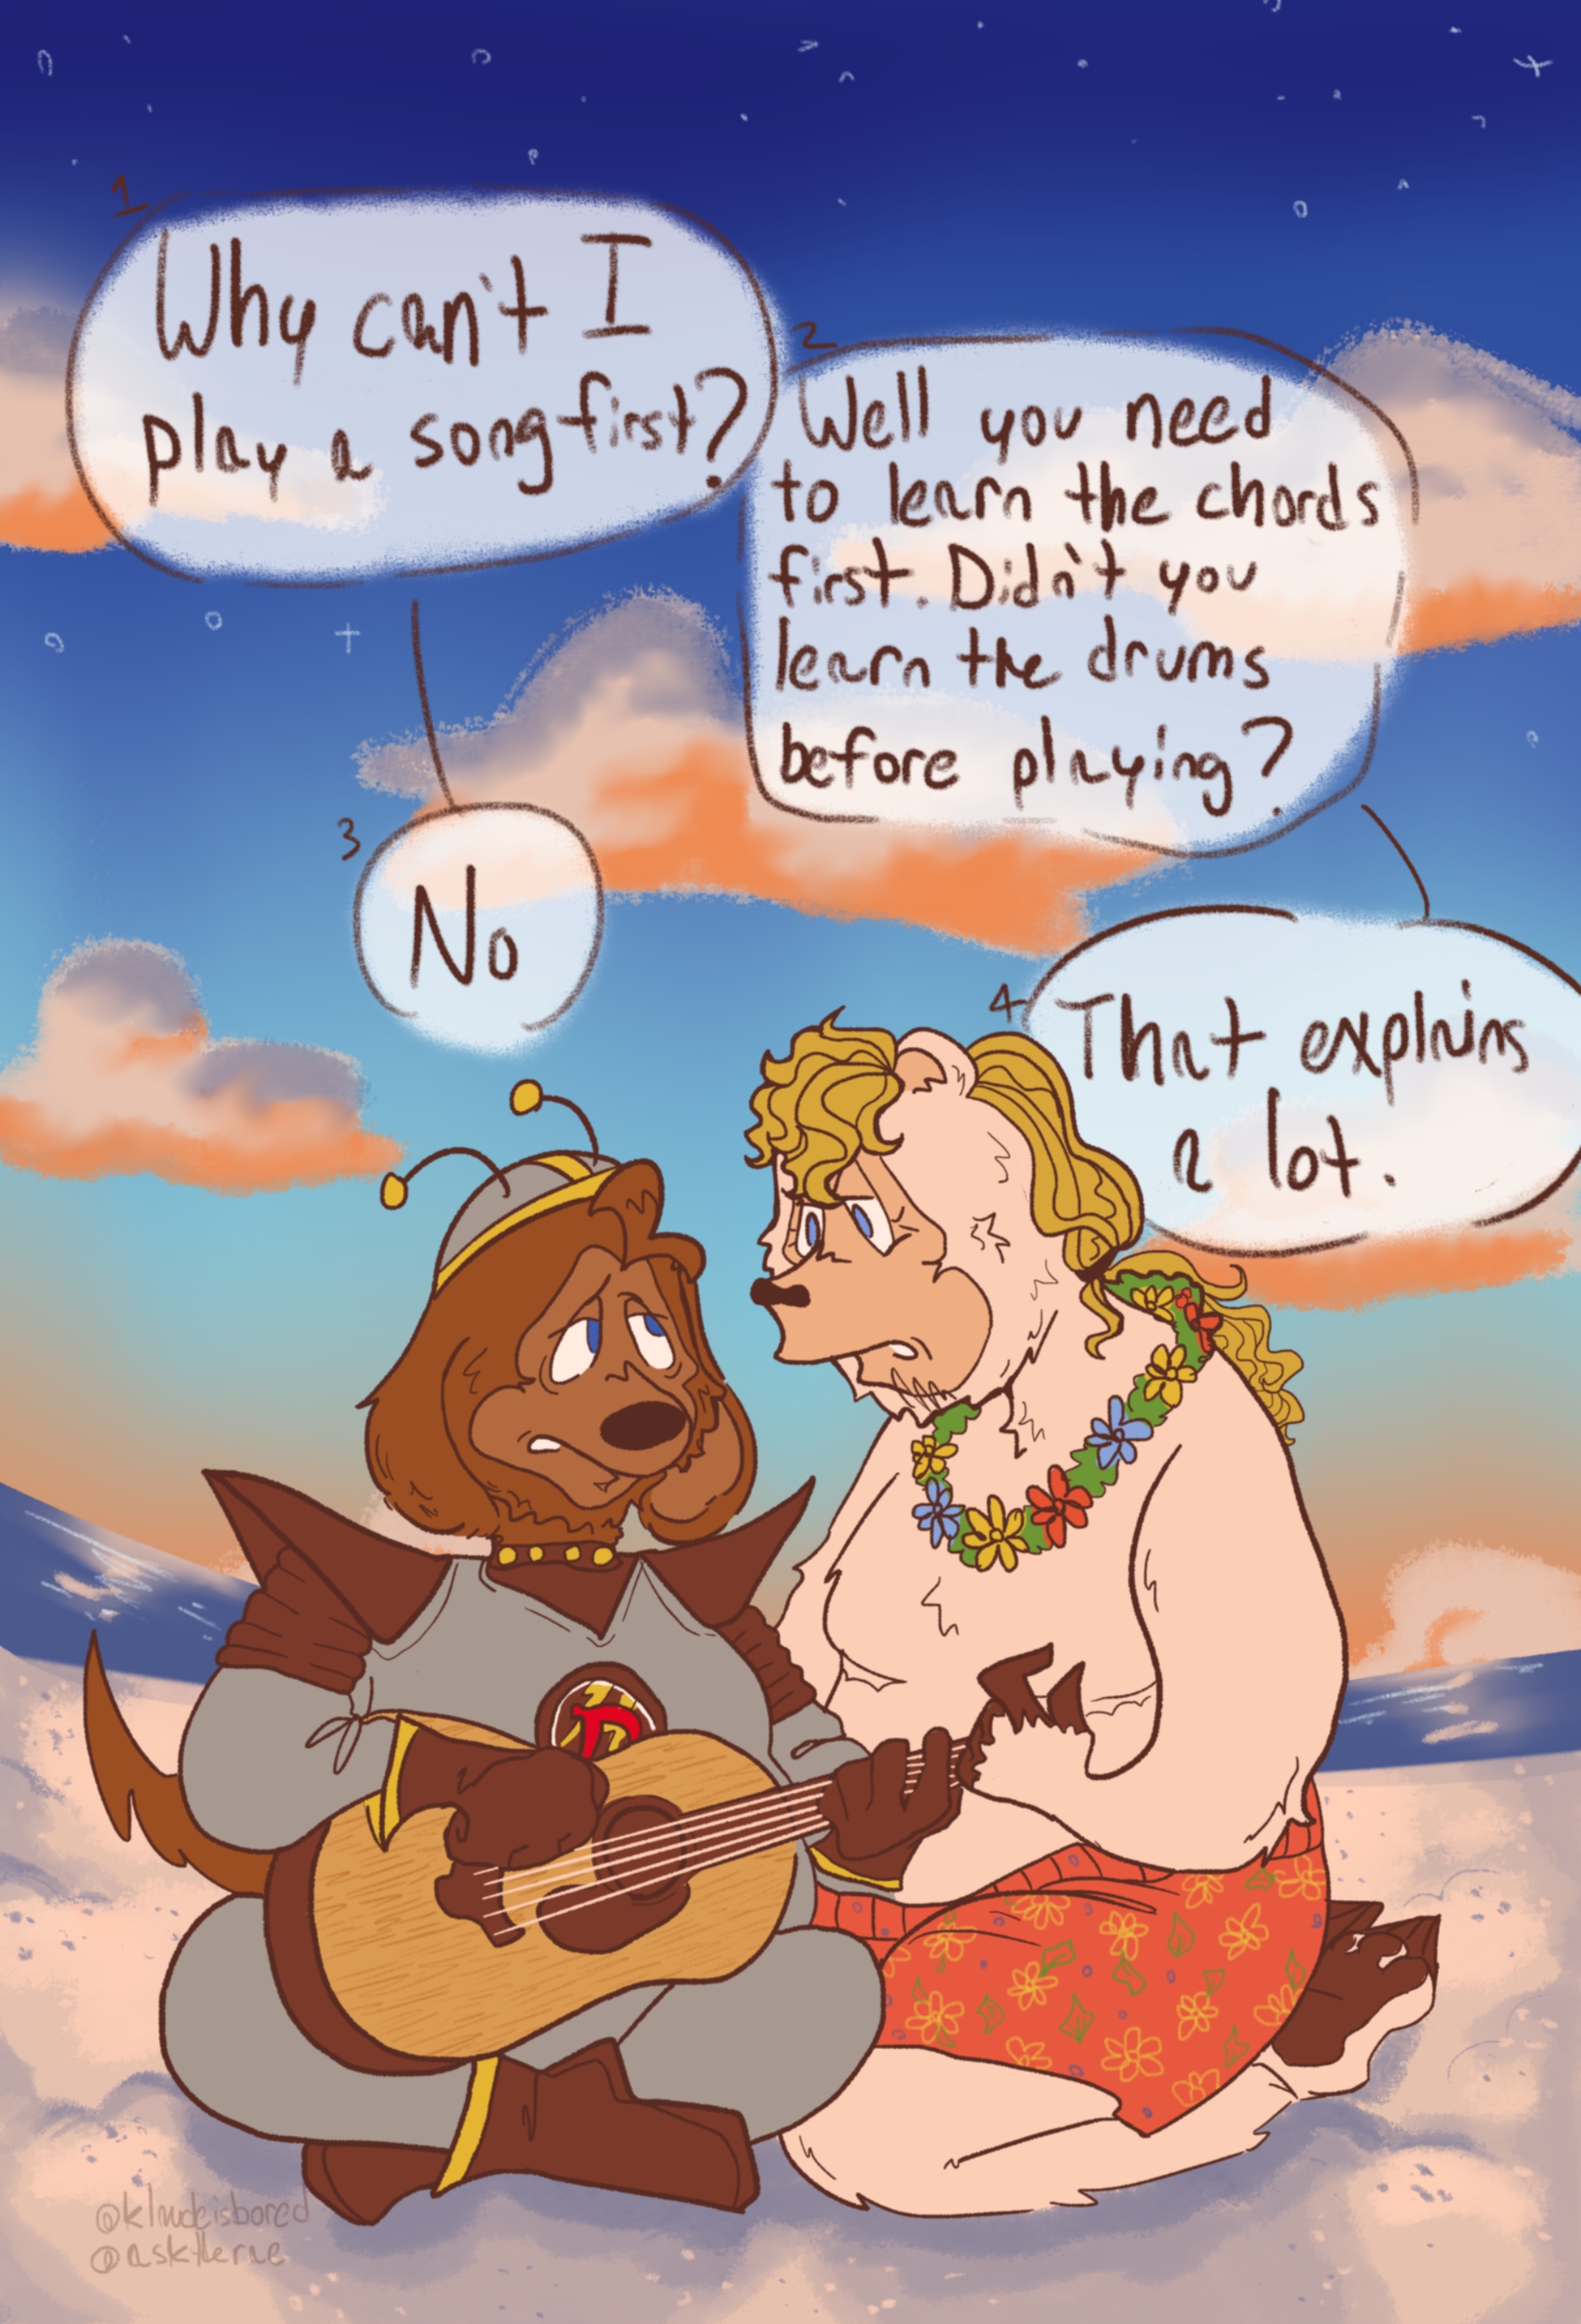 A drawing of beach bear and dook larue sitting on the beach. the sky ranges from dark blue to a light orange, and there are various clouds floating above them. dook and beach are both wearing their on-stage outfits, and beach also has top surgery scars and his hair in a long ponytail. dook is sitting cross legged and holding an acoustic guitar. he is looking at beach questioningly. beach is sitting on his knees beside him. there are speech bubbles above their heads that labeled in order. dook: why can't i play a song first? beach: well you need to learn the chords first. didn't you learn the drums before playing? dook: no. beach: that explains a lot.